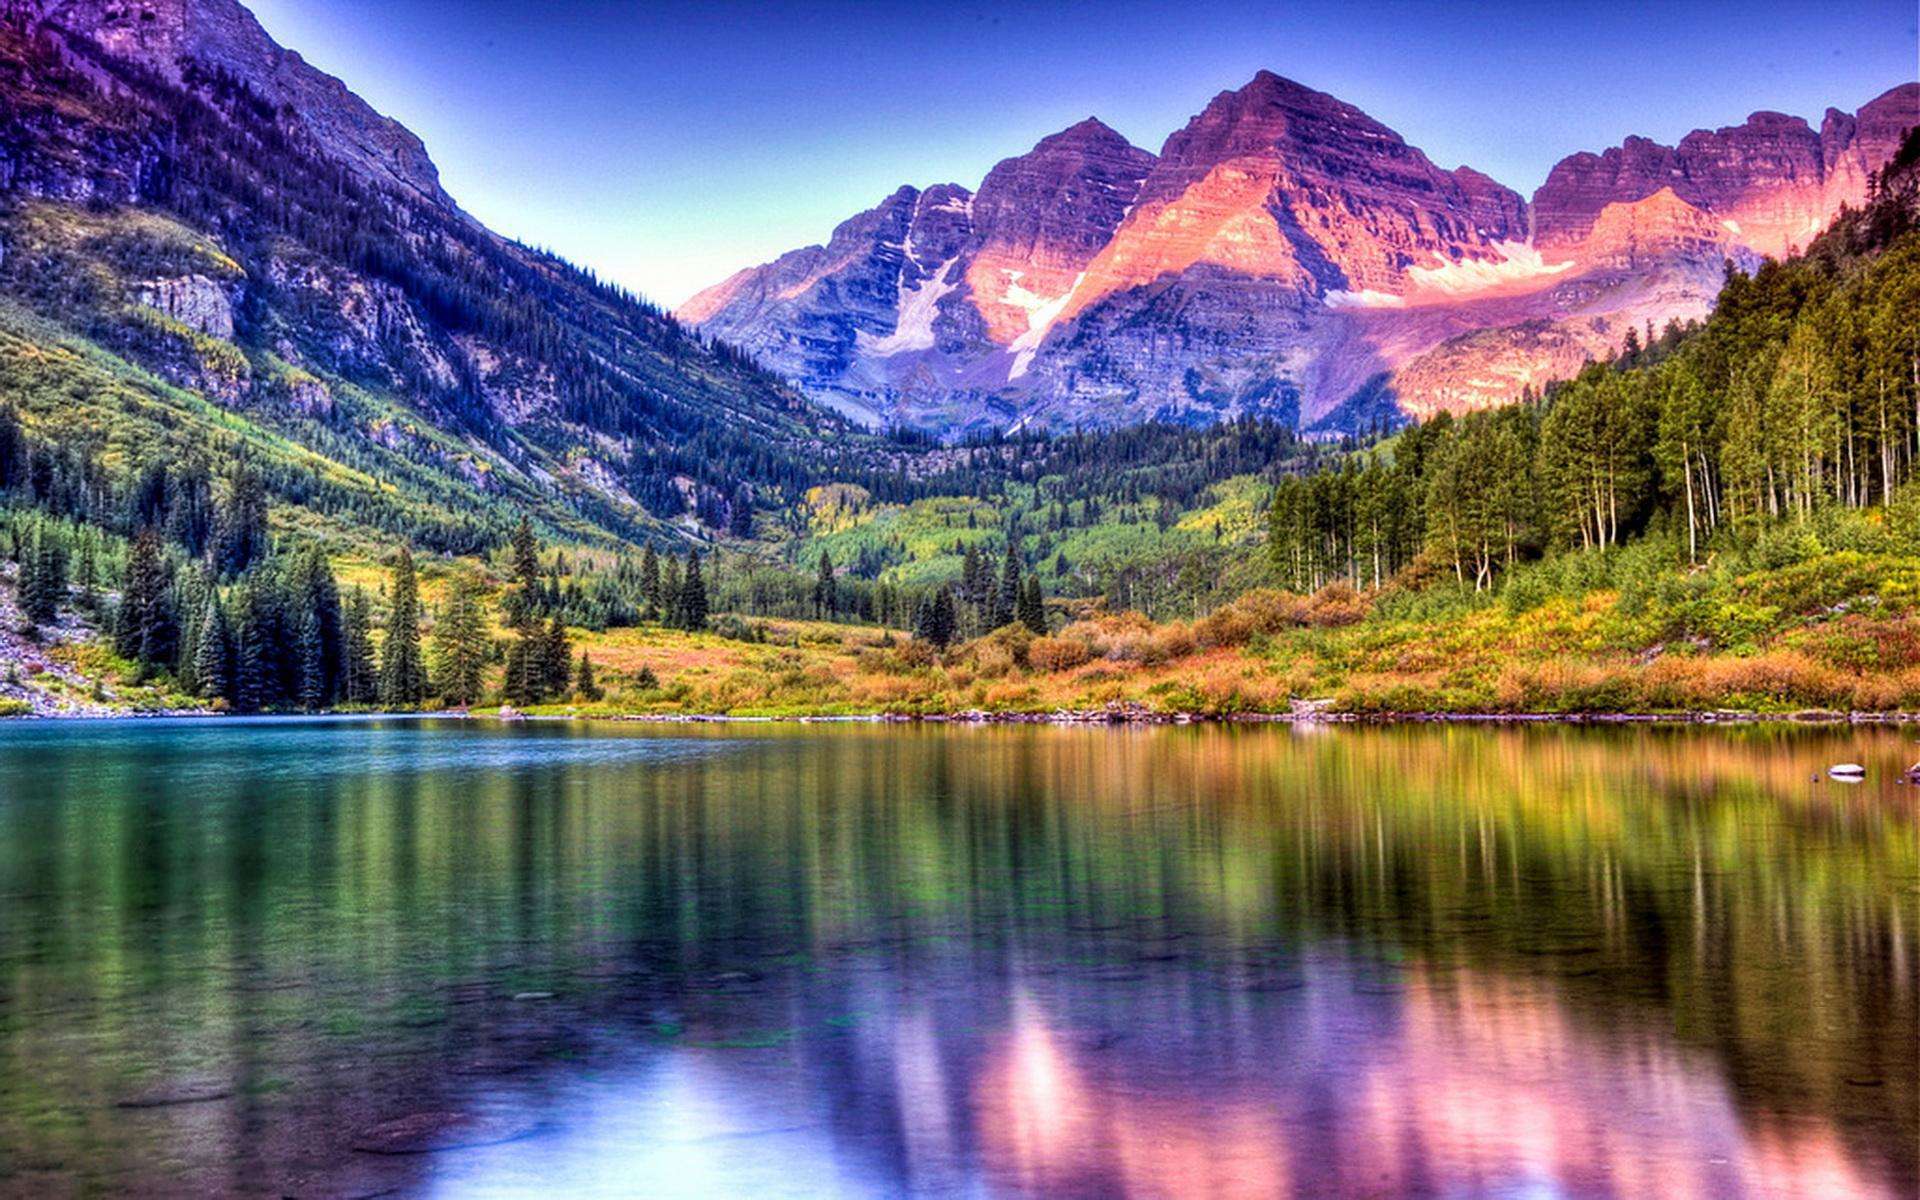 Most Popular Attractions In Colorful Colorado The